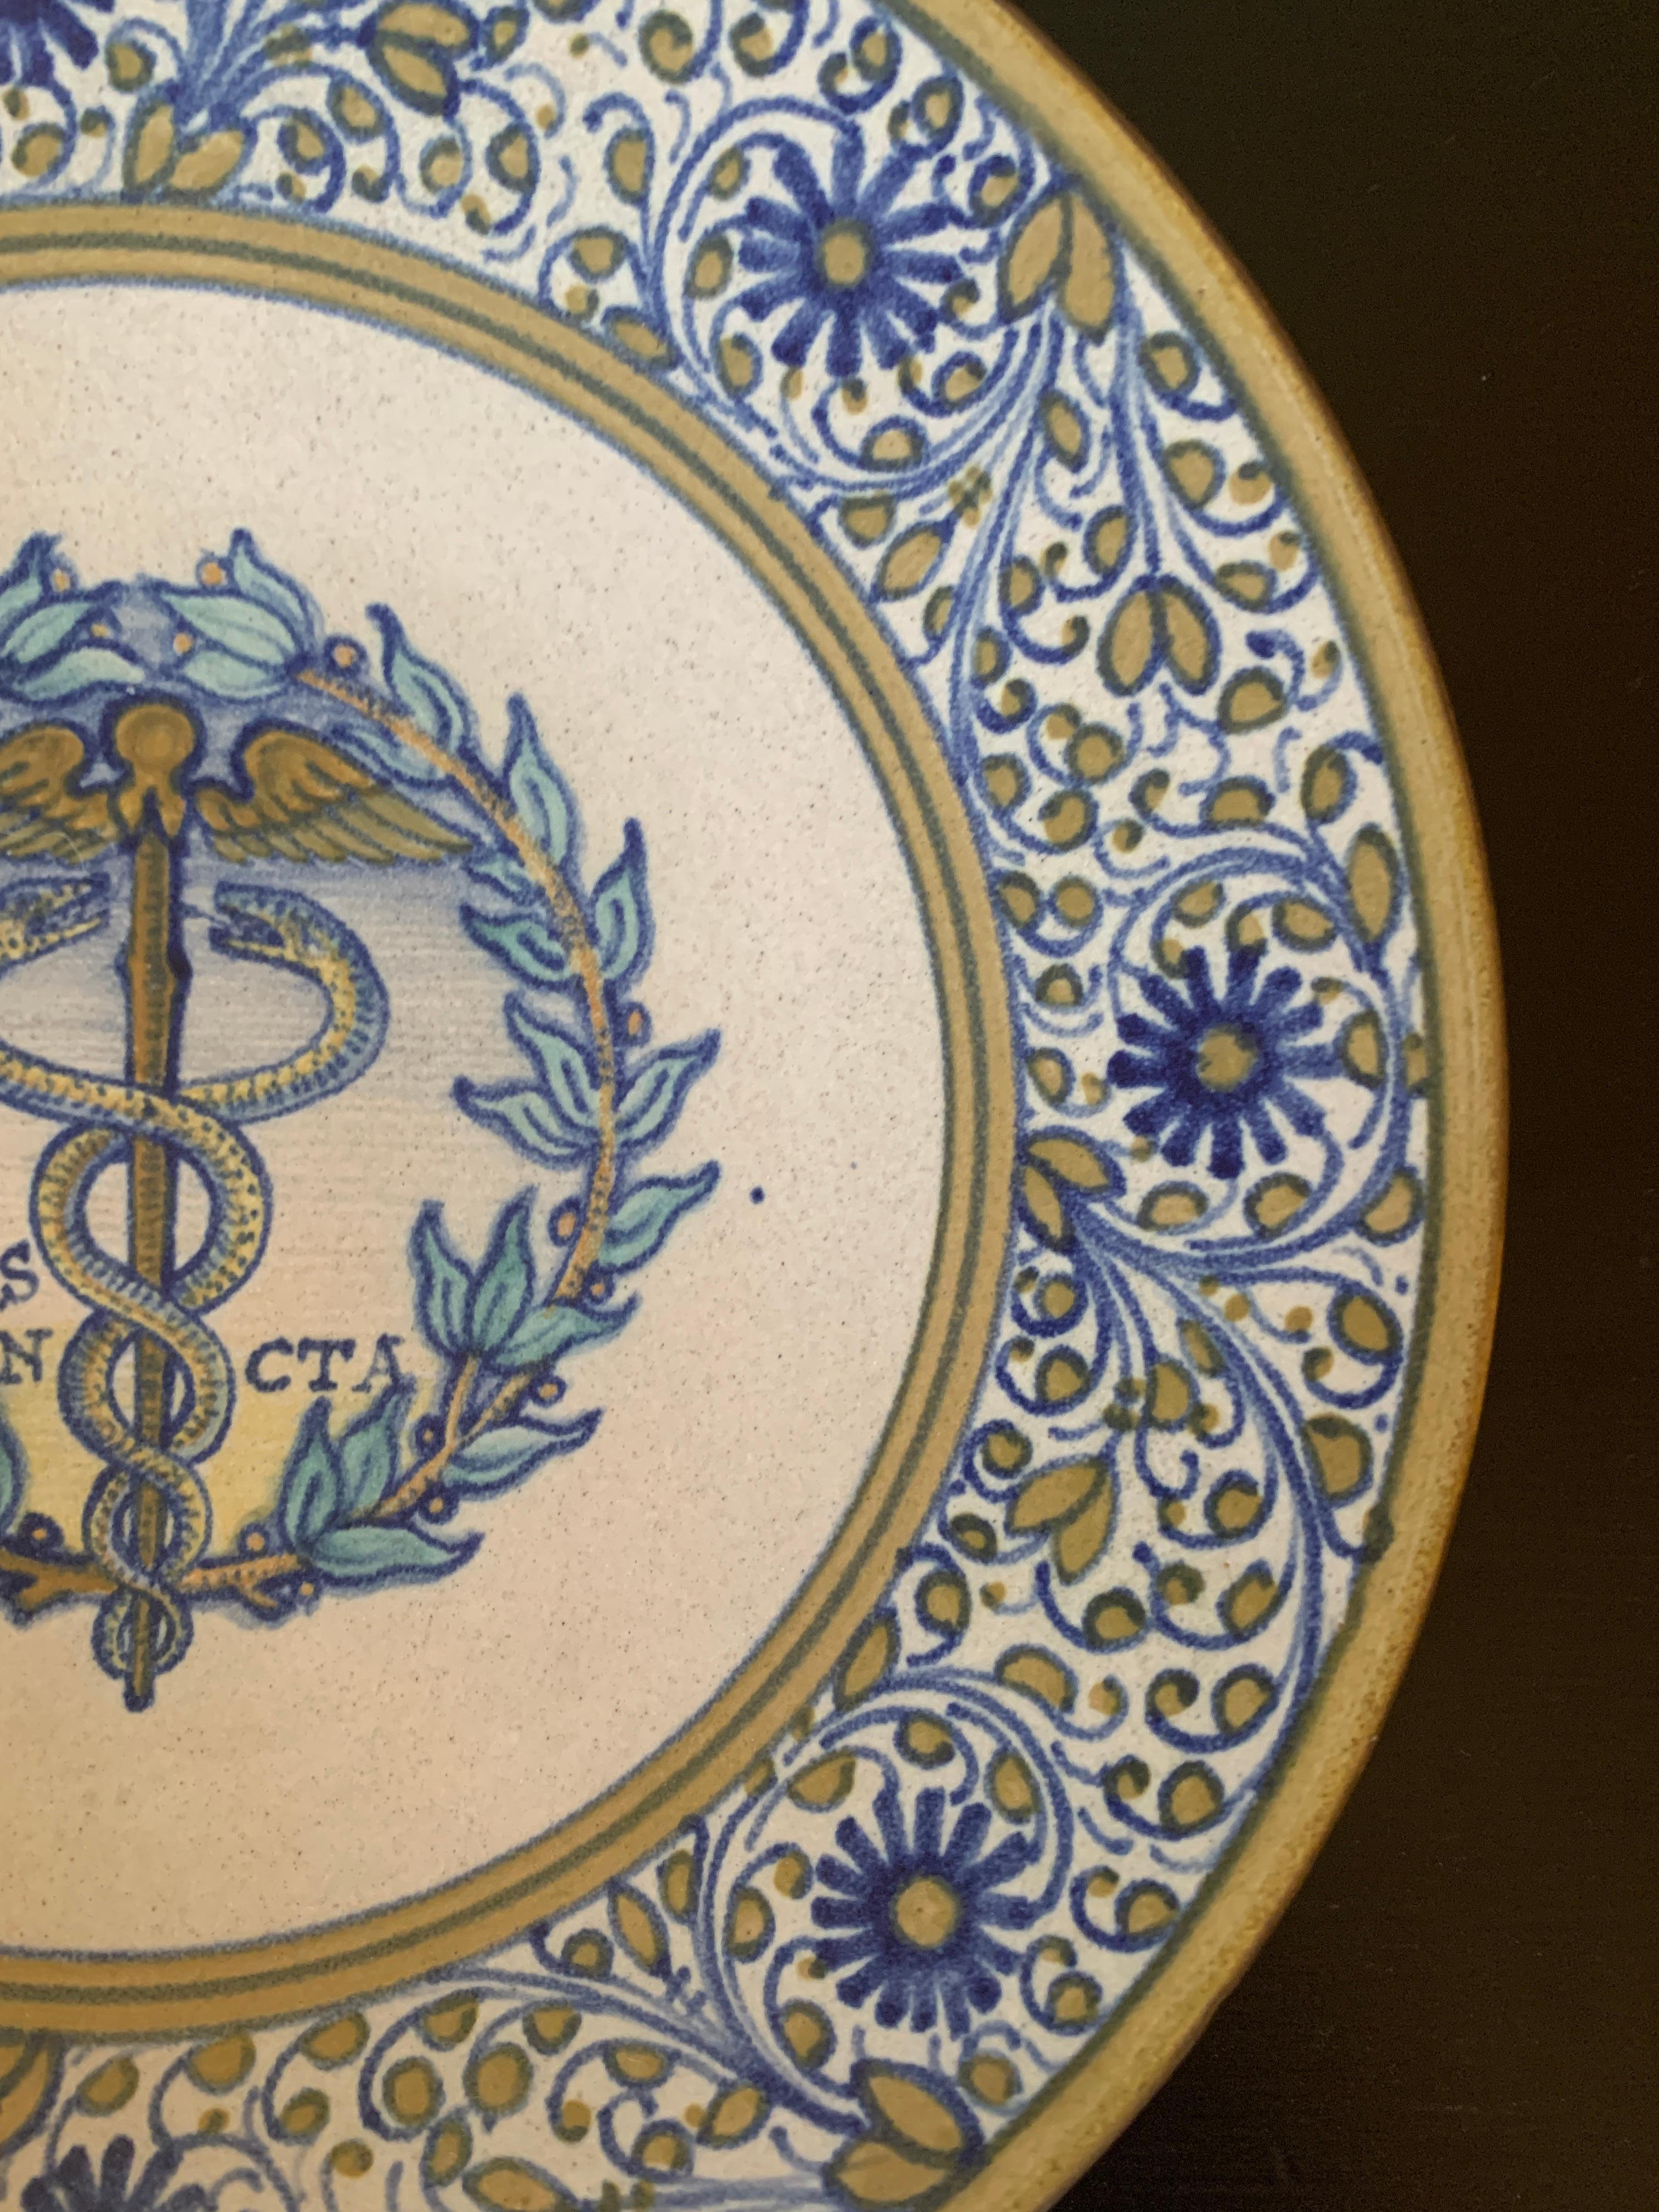 20th Century Italian Provincial Deruta Hand Painted Faience Caduceus Pottery Wall Plate For Sale